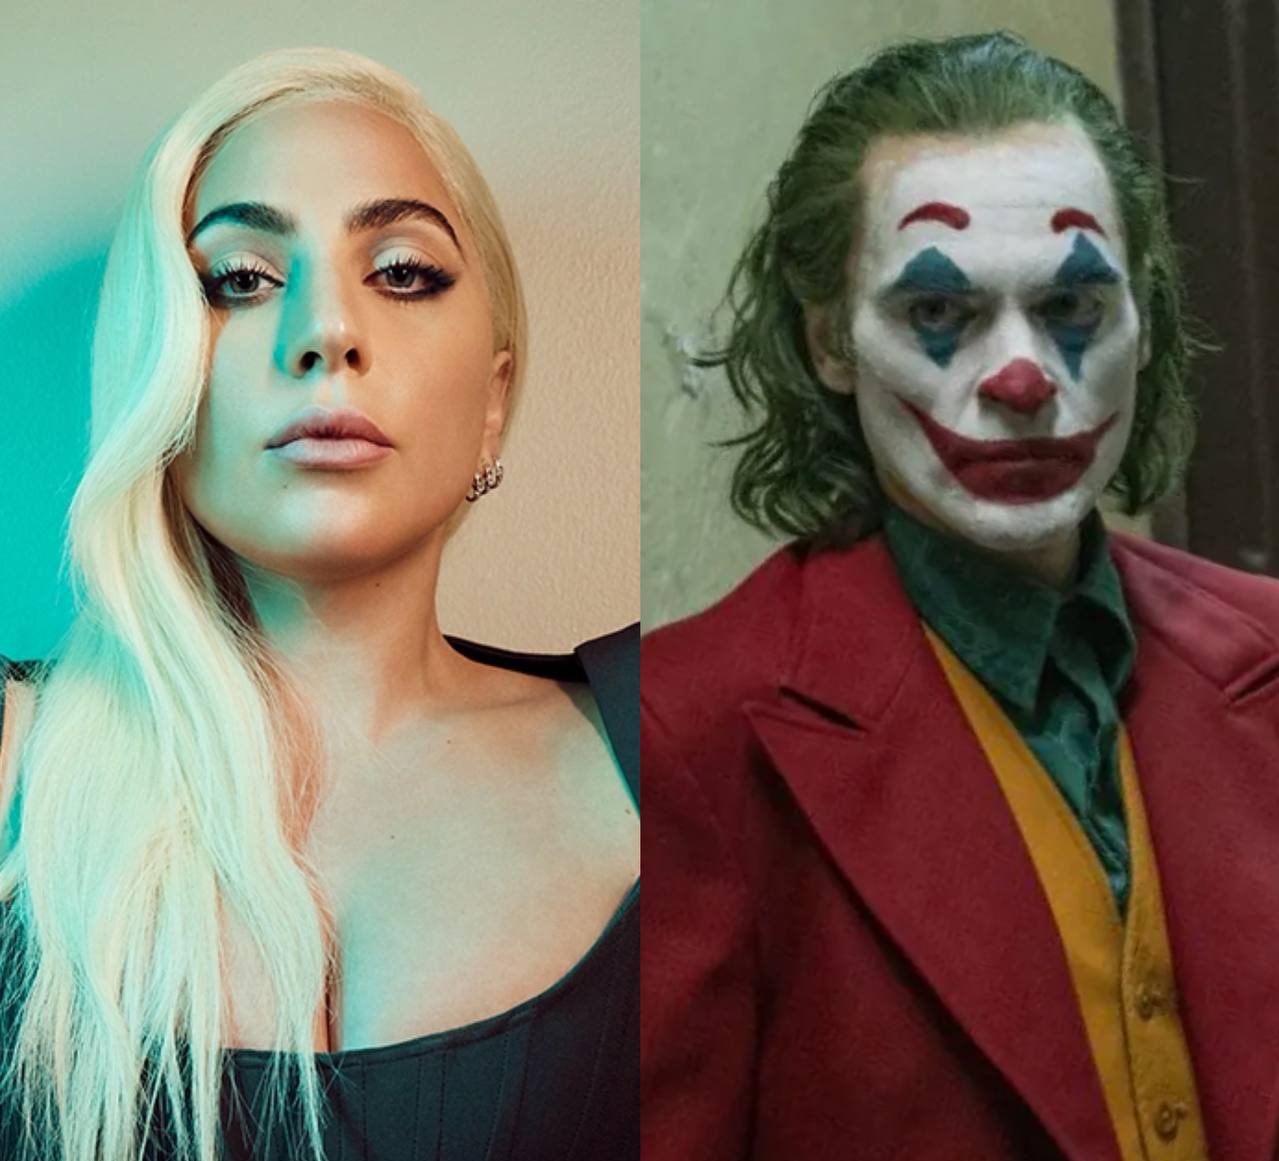 Uživatel Pop Tingz na Twitteru: „According to an insider from  @deuxmoiworld, Lady Gaga is set to be the female lead in the sequel to ' Joker'. https://t.co/9ncn46Zw9X“ / Twitter